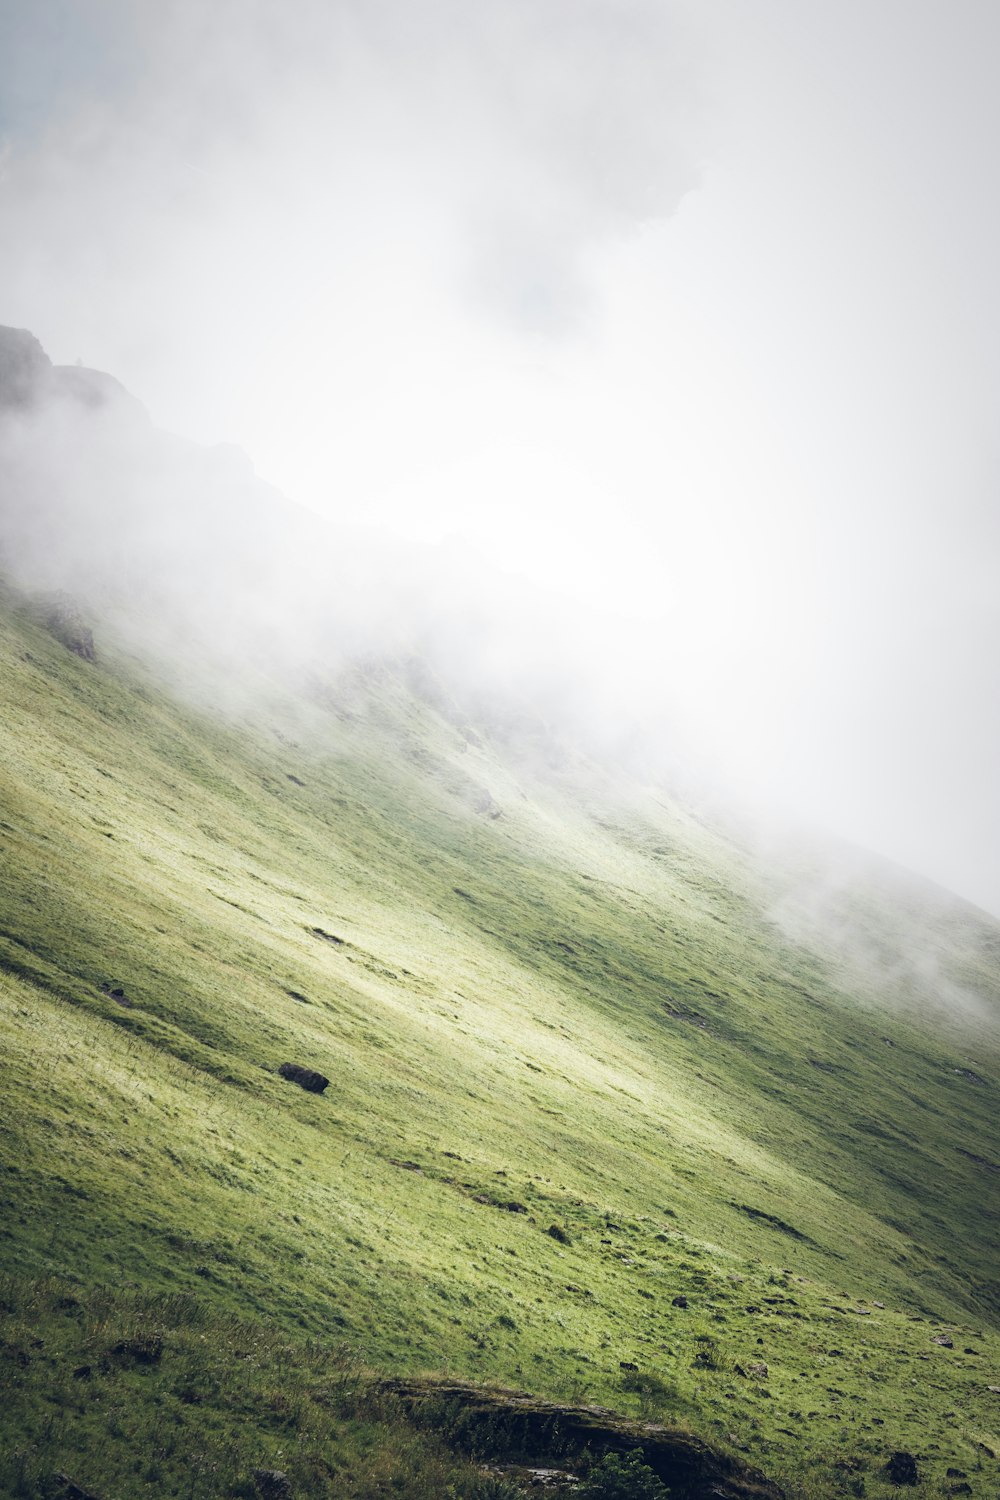 grass covered slope during foggy weather